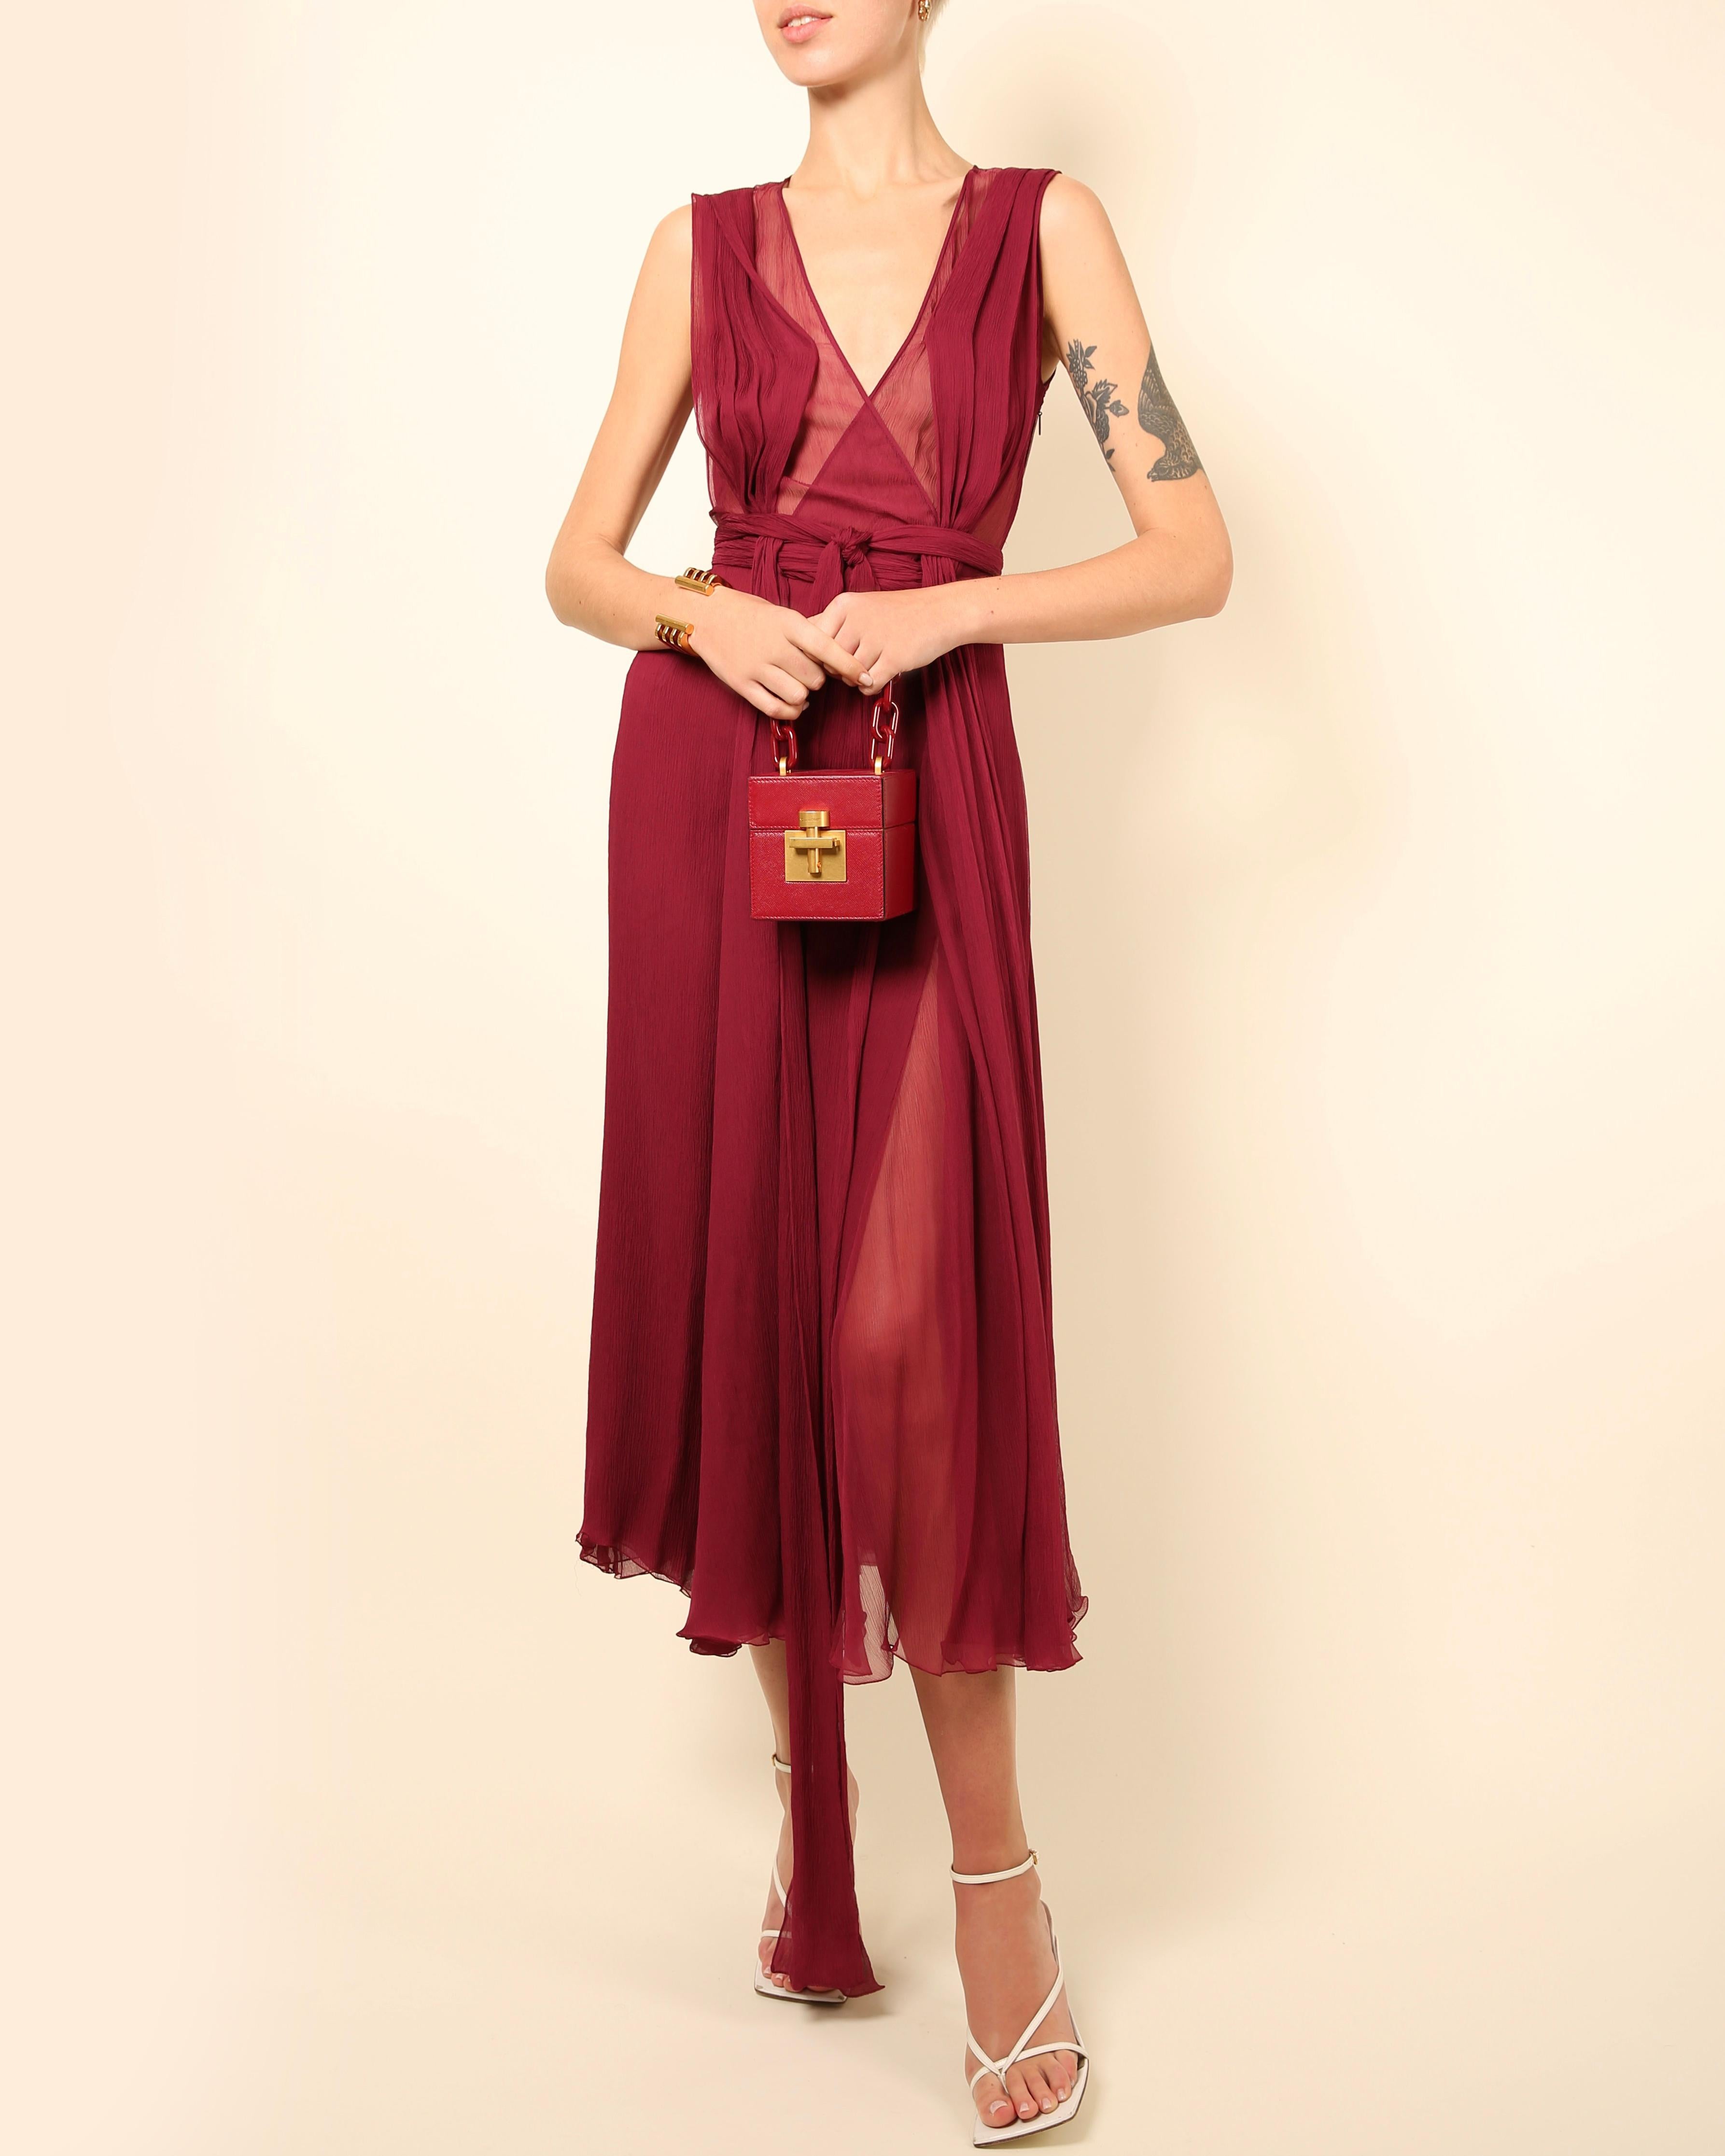 Women's Gucci Fall 2011 burgundy chiffon silk plunging neckline sheer cut out gown dress For Sale